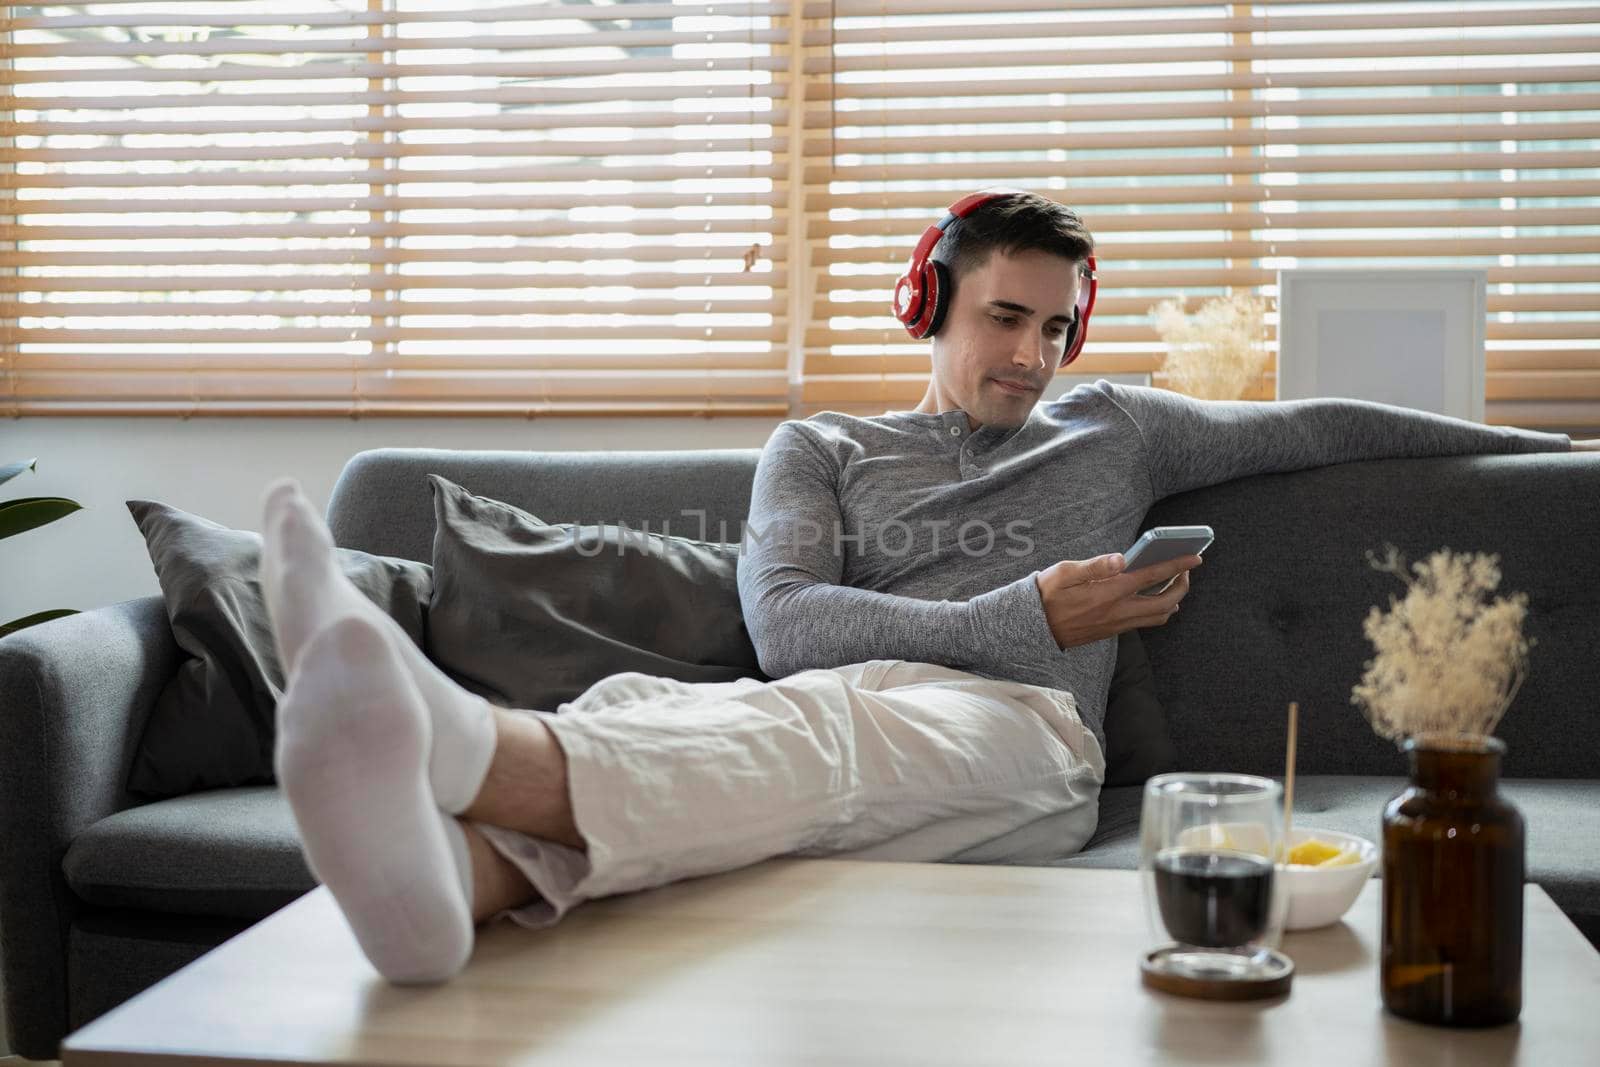 Attractive man sitting on comfortable couch and using smart phone.